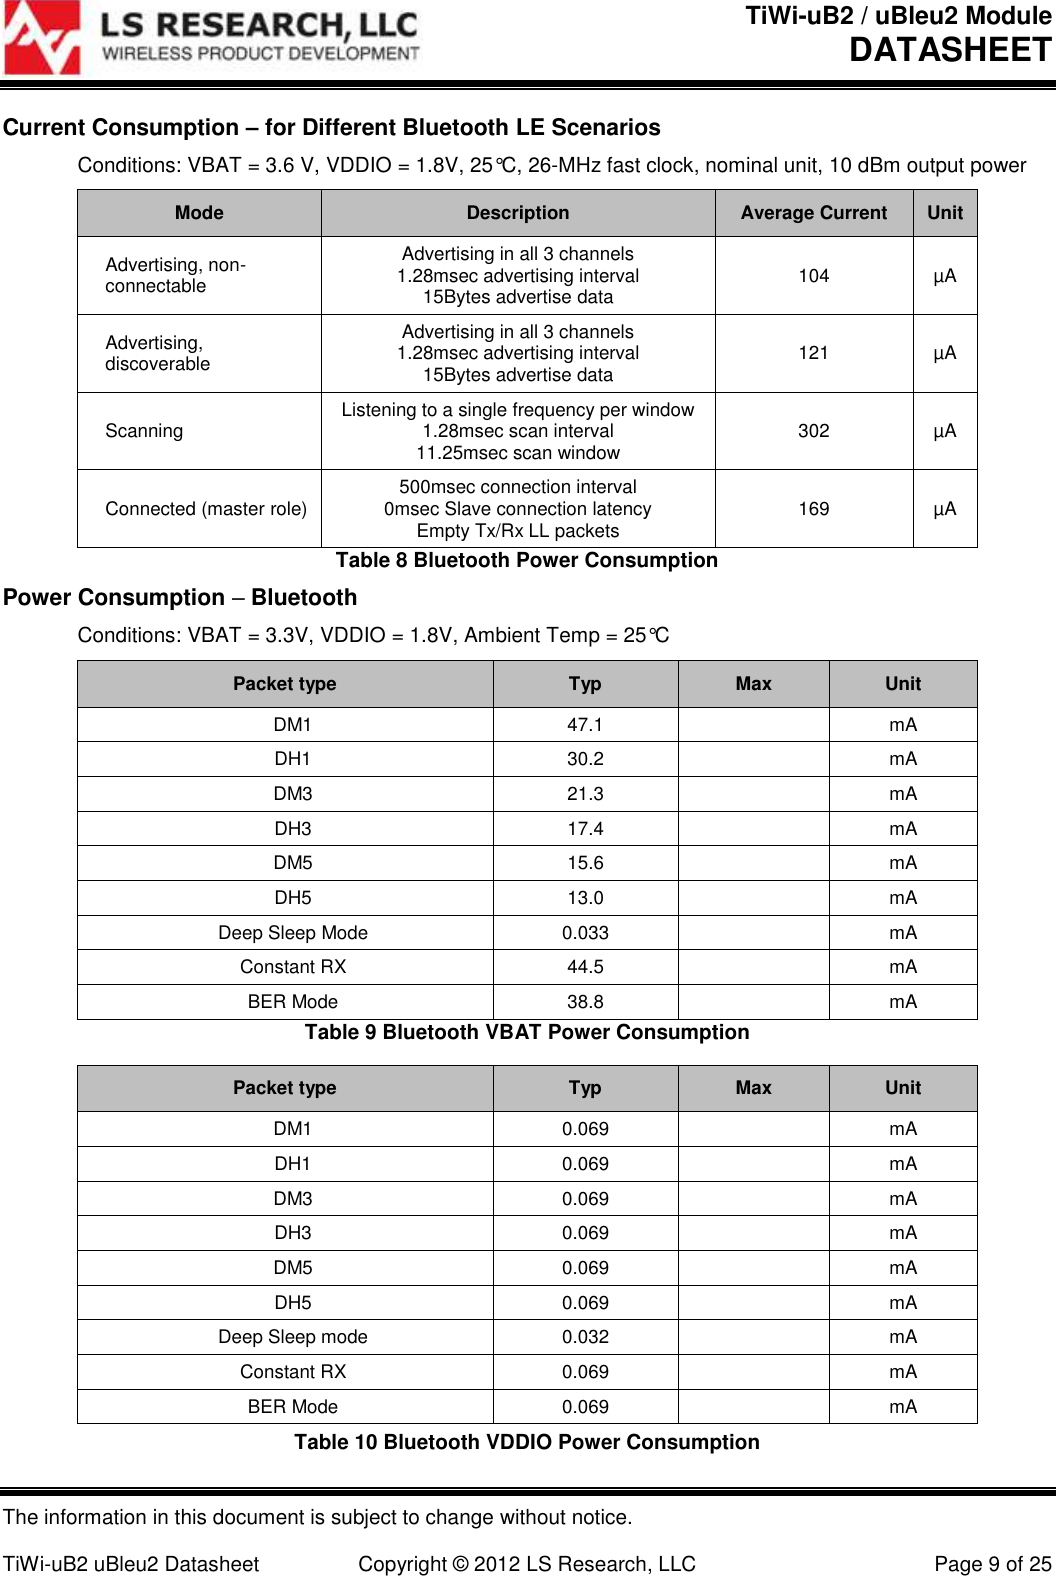 TiWi-uB2 / uBleu2 Module DATASHEET  The information in this document is subject to change without notice.  TiWi-uB2 uBleu2 Datasheet  Copyright © 2012 LS Research, LLC  Page 9 of 25 Current Consumption – for Different Bluetooth LE Scenarios  Conditions: VBAT = 3.6 V, VDDIO = 1.8V, 25°C, 26-MHz fast clock, nominal unit, 10 dBm output power Mode Description Average Current Unit Advertising, non-connectable Advertising in all 3 channels 1.28msec advertising interval 15Bytes advertise data 104 µA Advertising, discoverable Advertising in all 3 channels 1.28msec advertising interval 15Bytes advertise data 121 µA Scanning Listening to a single frequency per window 1.28msec scan interval 11.25msec scan window 302 µA Connected (master role) 500msec connection interval 0msec Slave connection latency Empty Tx/Rx LL packets 169 µA Table 8 Bluetooth Power Consumption Power Consumption – Bluetooth Conditions: VBAT = 3.3V, VDDIO = 1.8V, Ambient Temp = 25°C Packet type Typ Max Unit DM1 47.1  mA DH1 30.2  mA DM3 21.3  mA DH3 17.4  mA DM5 15.6  mA DH5 13.0  mA Deep Sleep Mode 0.033  mA Constant RX 44.5  mA BER Mode 38.8  mA Table 9 Bluetooth VBAT Power Consumption Packet type Typ Max Unit DM1 0.069  mA DH1 0.069  mA DM3 0.069  mA DH3 0.069  mA DM5 0.069  mA DH5 0.069  mA Deep Sleep mode 0.032  mA Constant RX 0.069  mA BER Mode 0.069  mA Table 10 Bluetooth VDDIO Power Consumption 